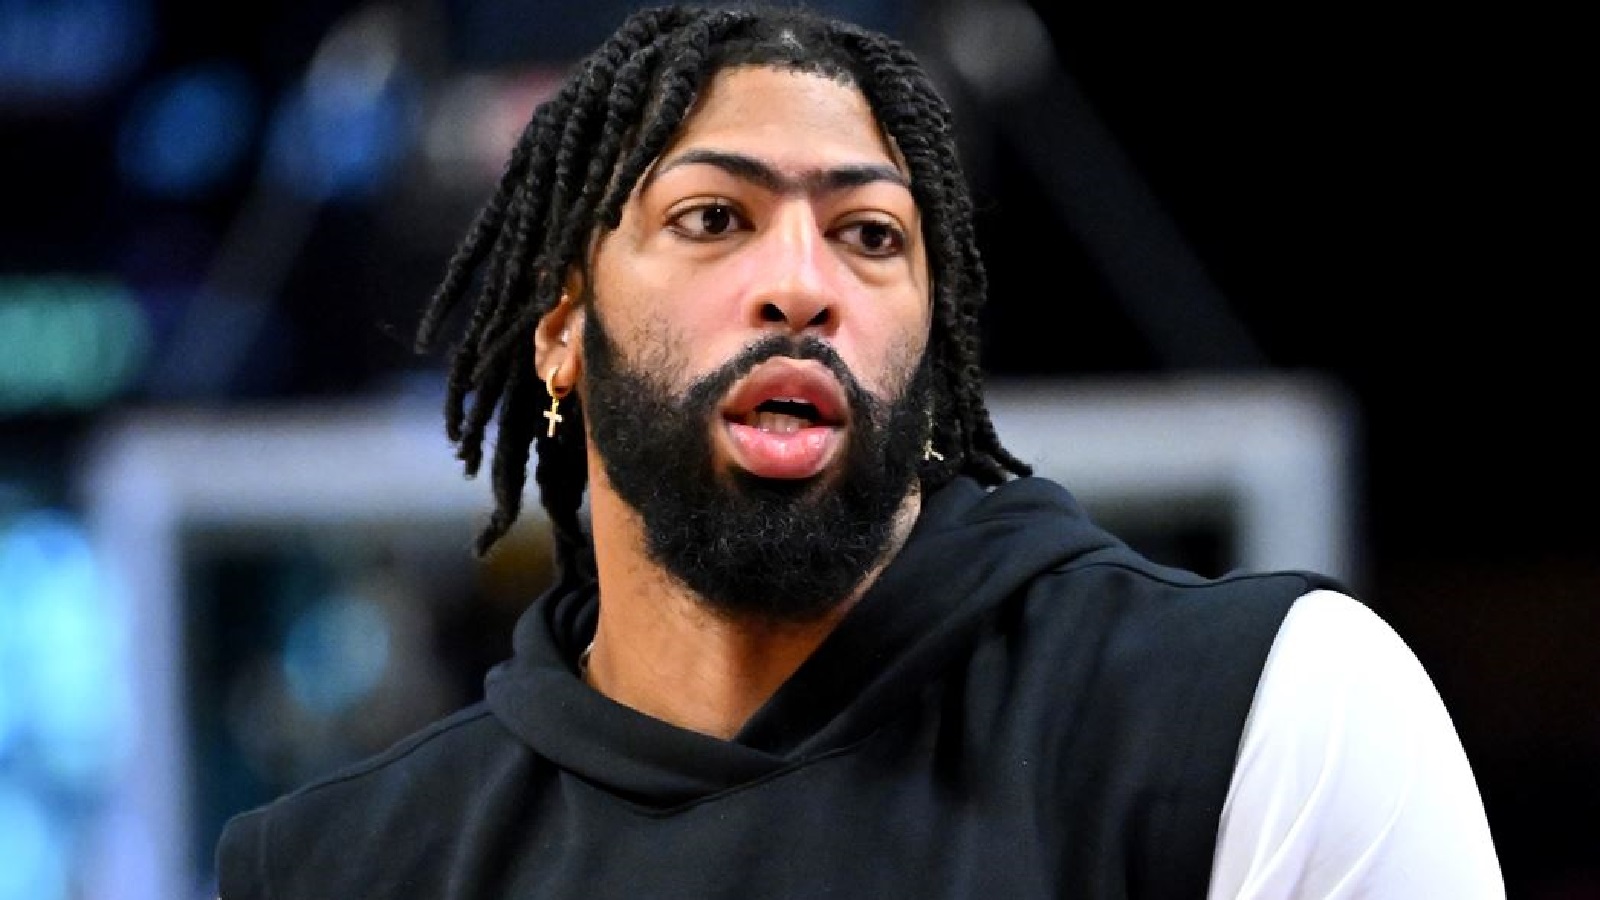 Los Angeles Lakers' Anthony Davis Wants a Championship